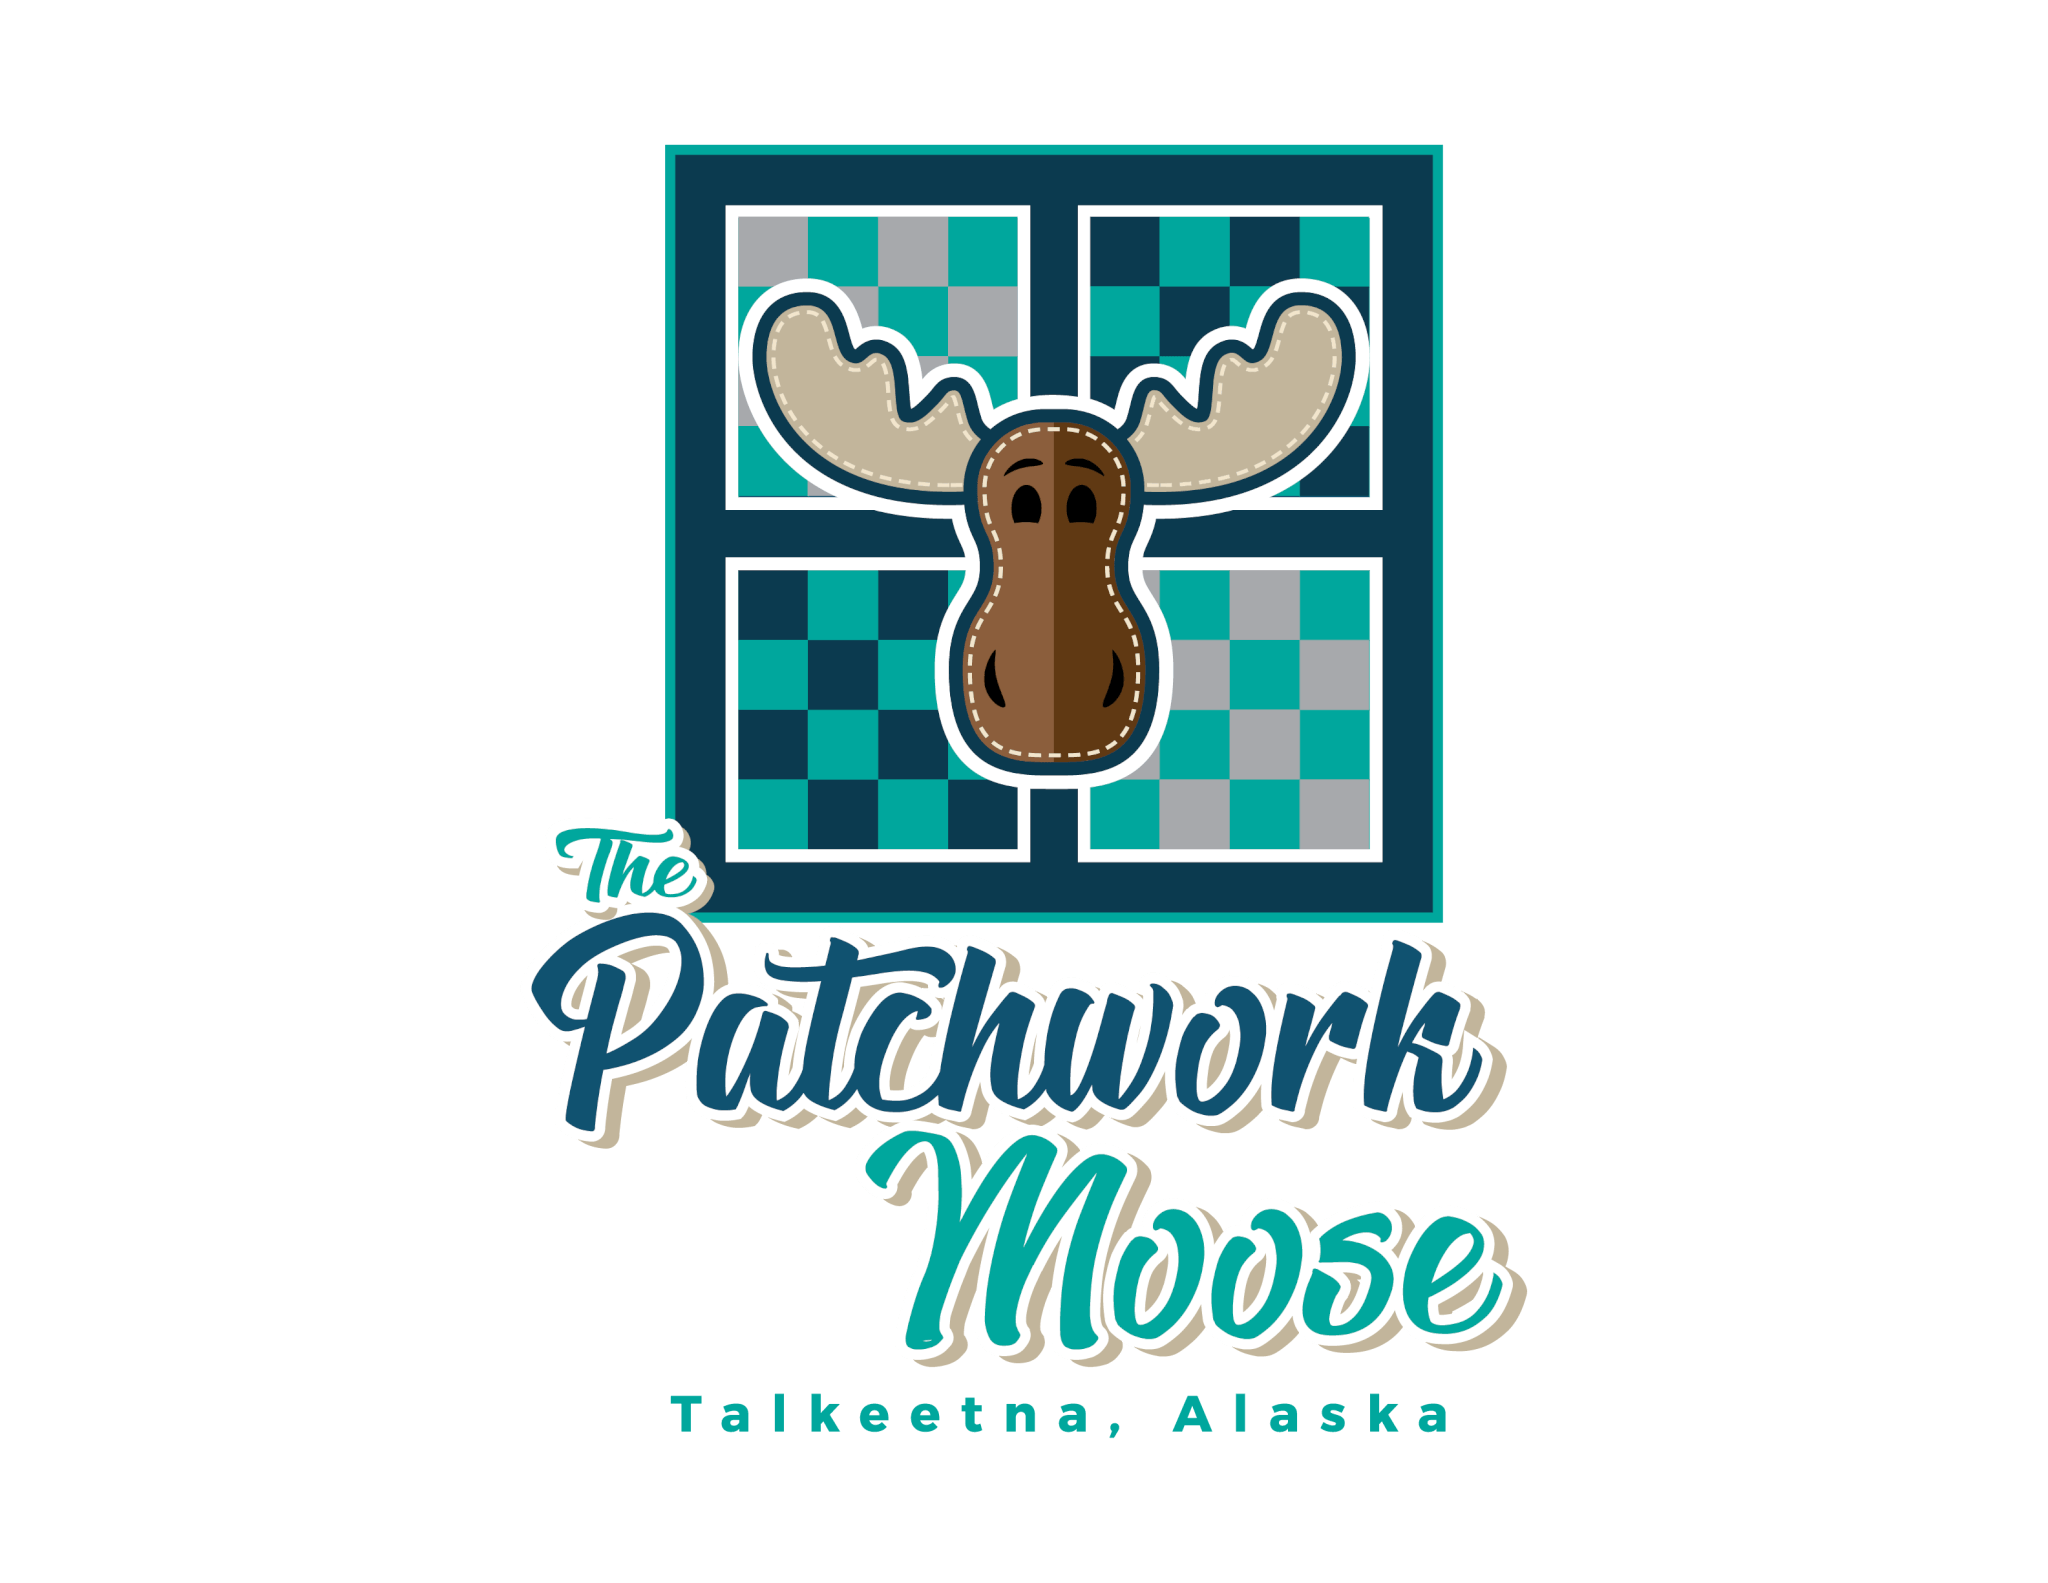 The Patchwork Moose